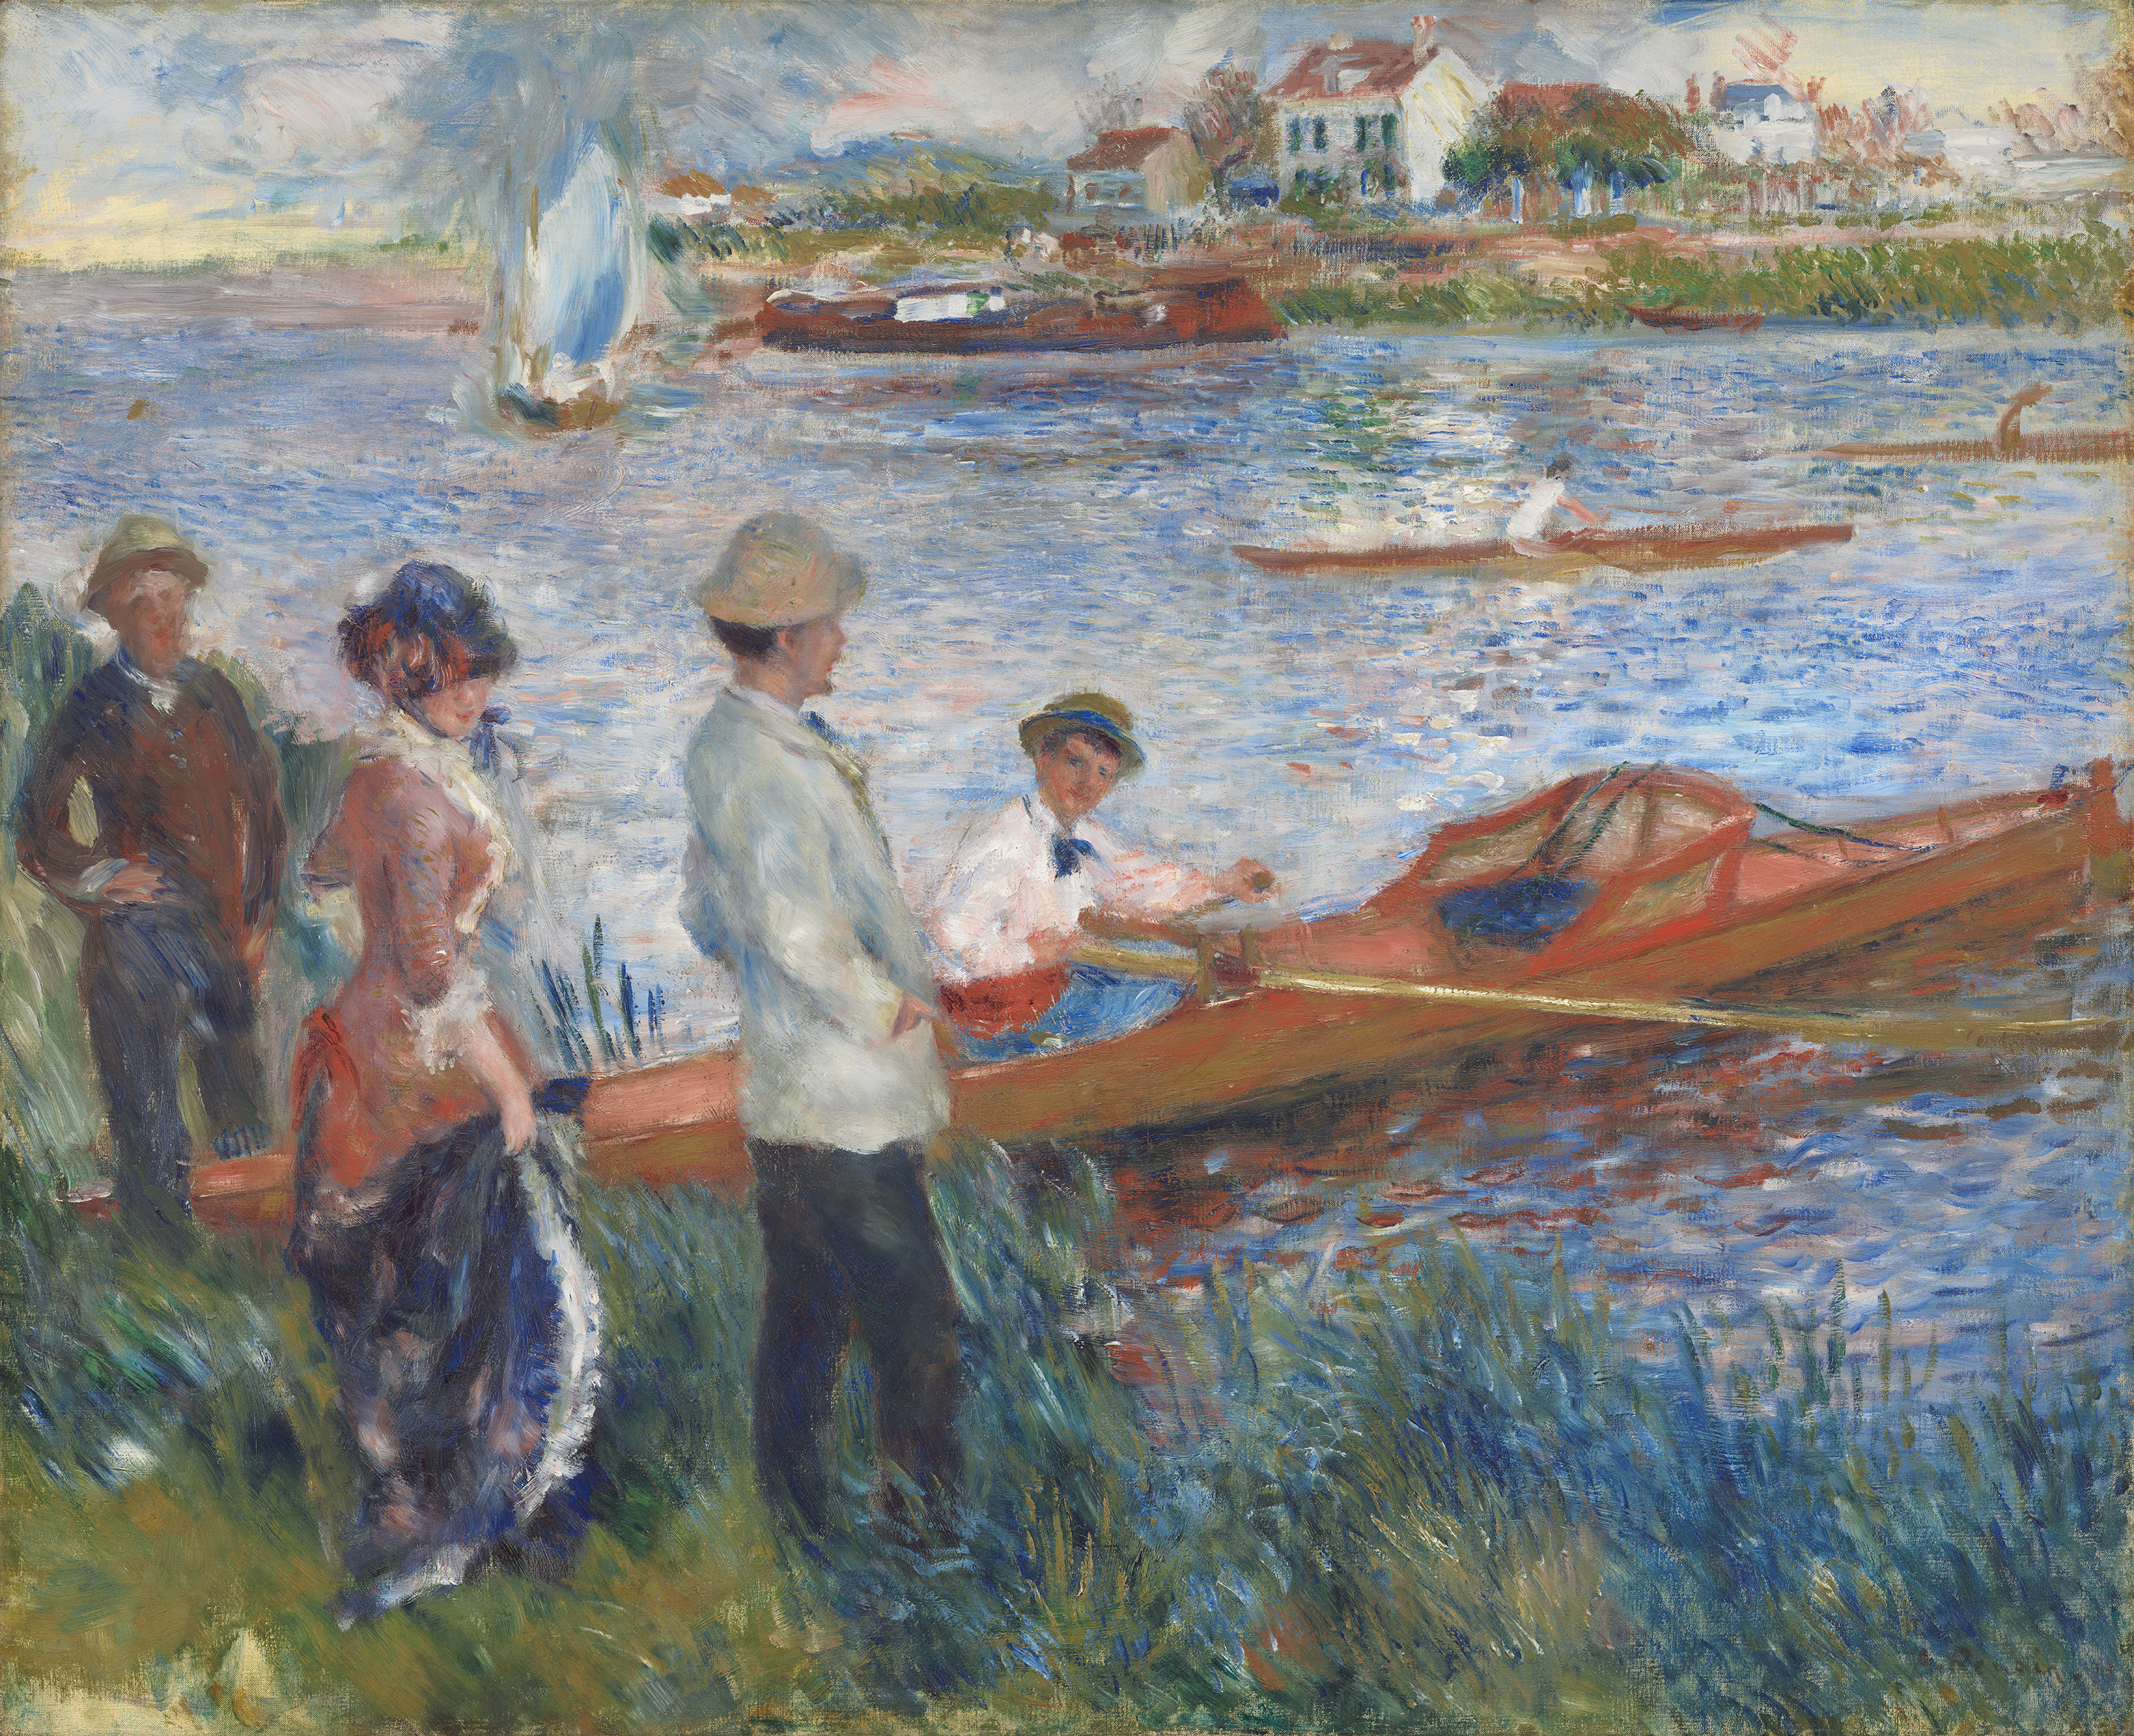 Impressionist painting of a woman and oarsmen on shoreline with a rowboat. Rowing art by Pierre Auguste-Renoir